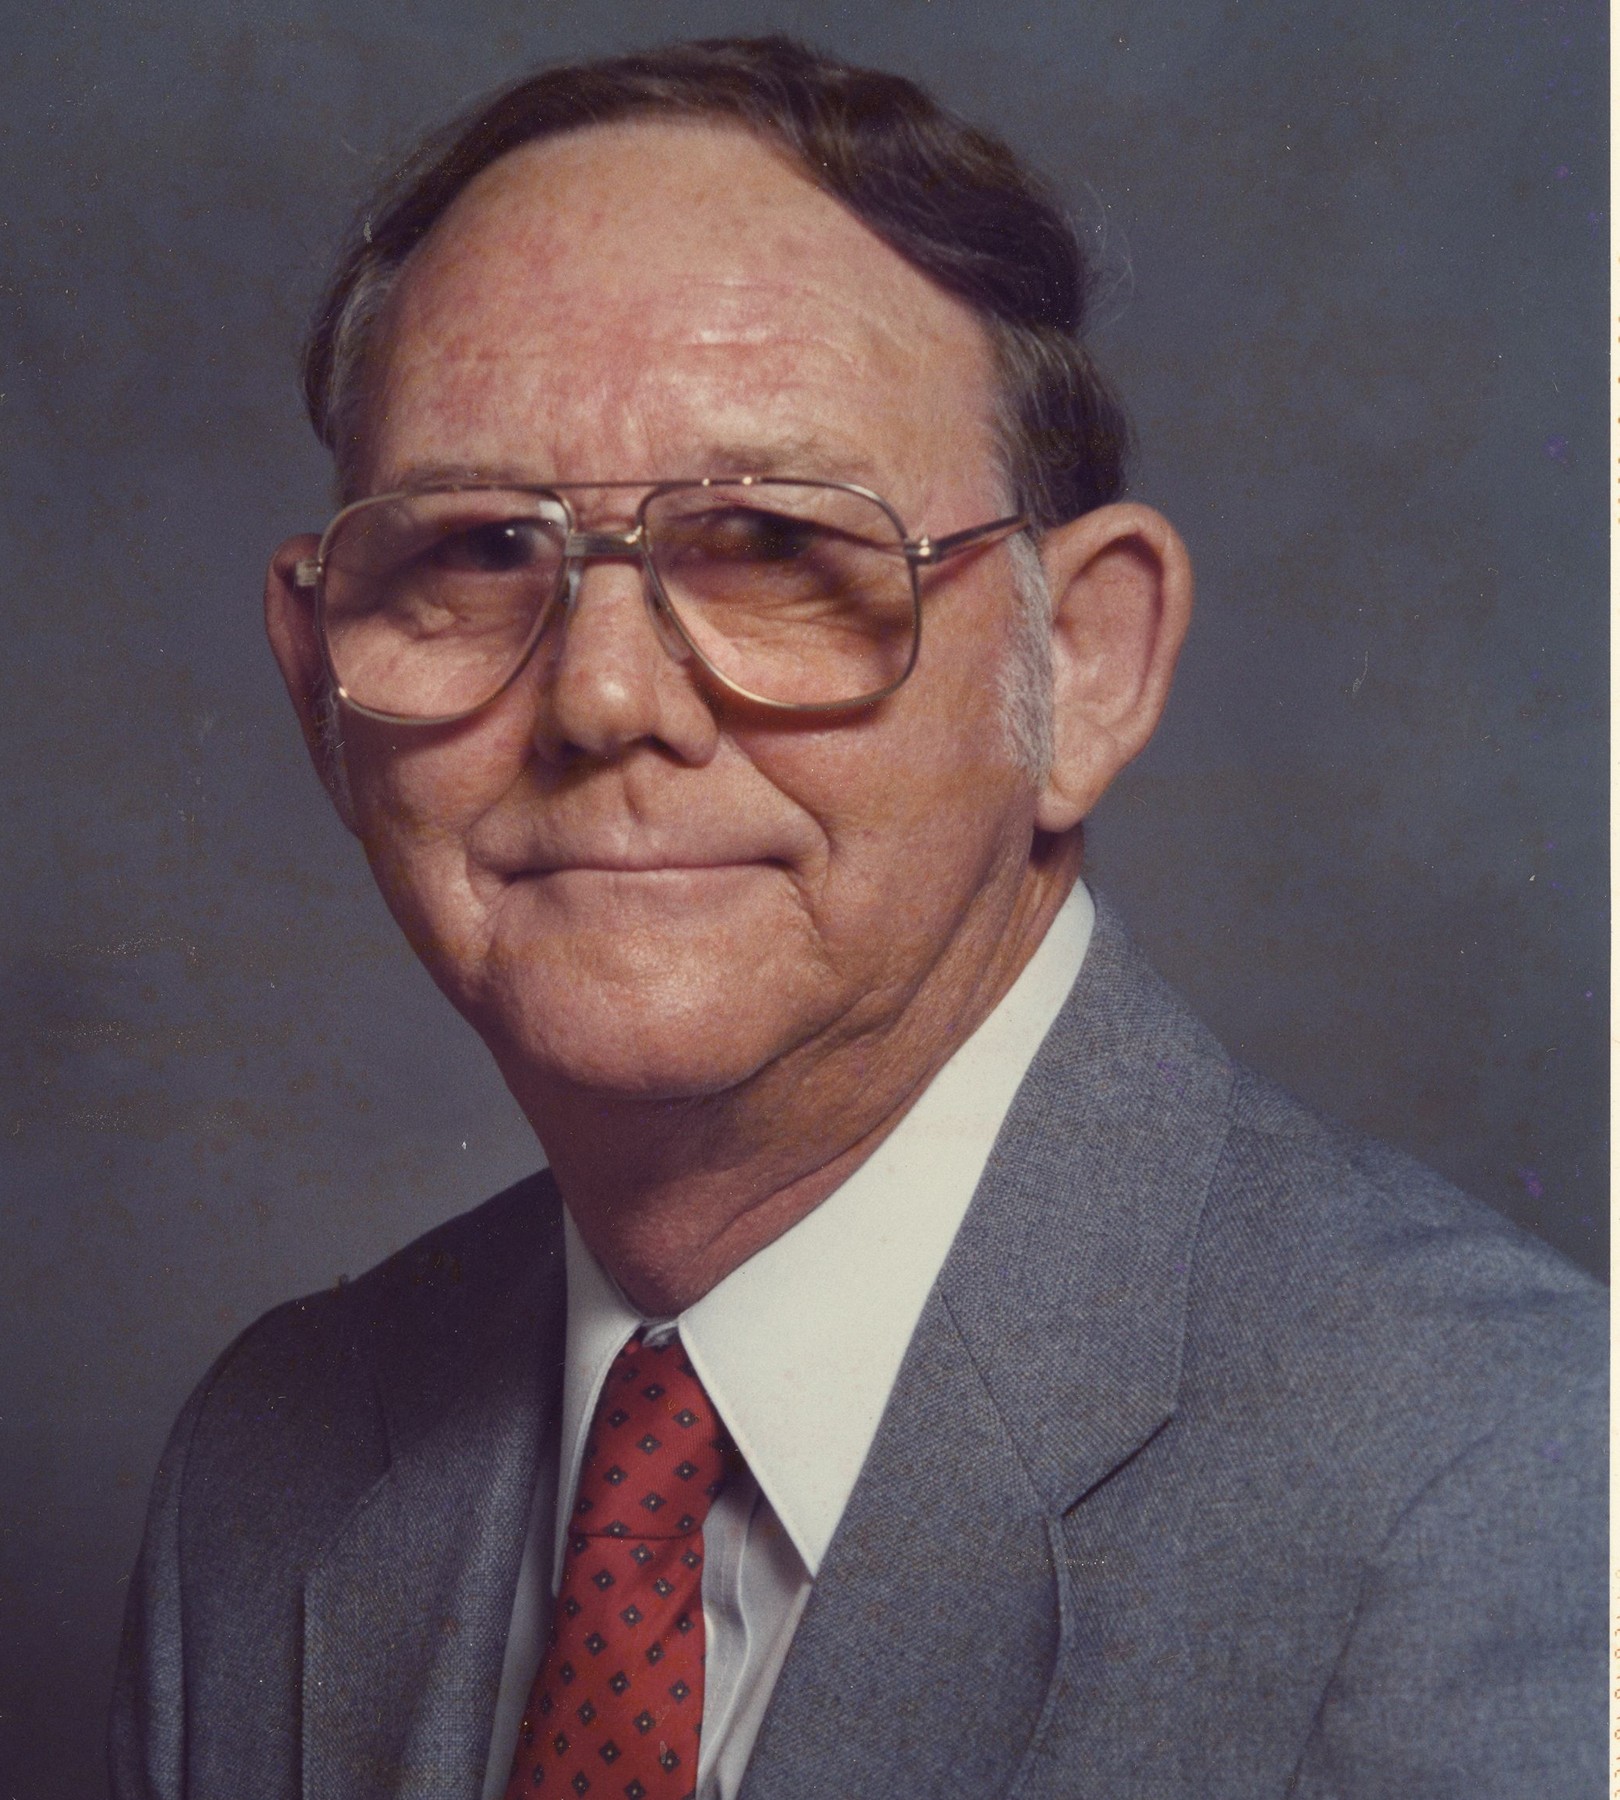 Share Obituary for Lewis Clemons